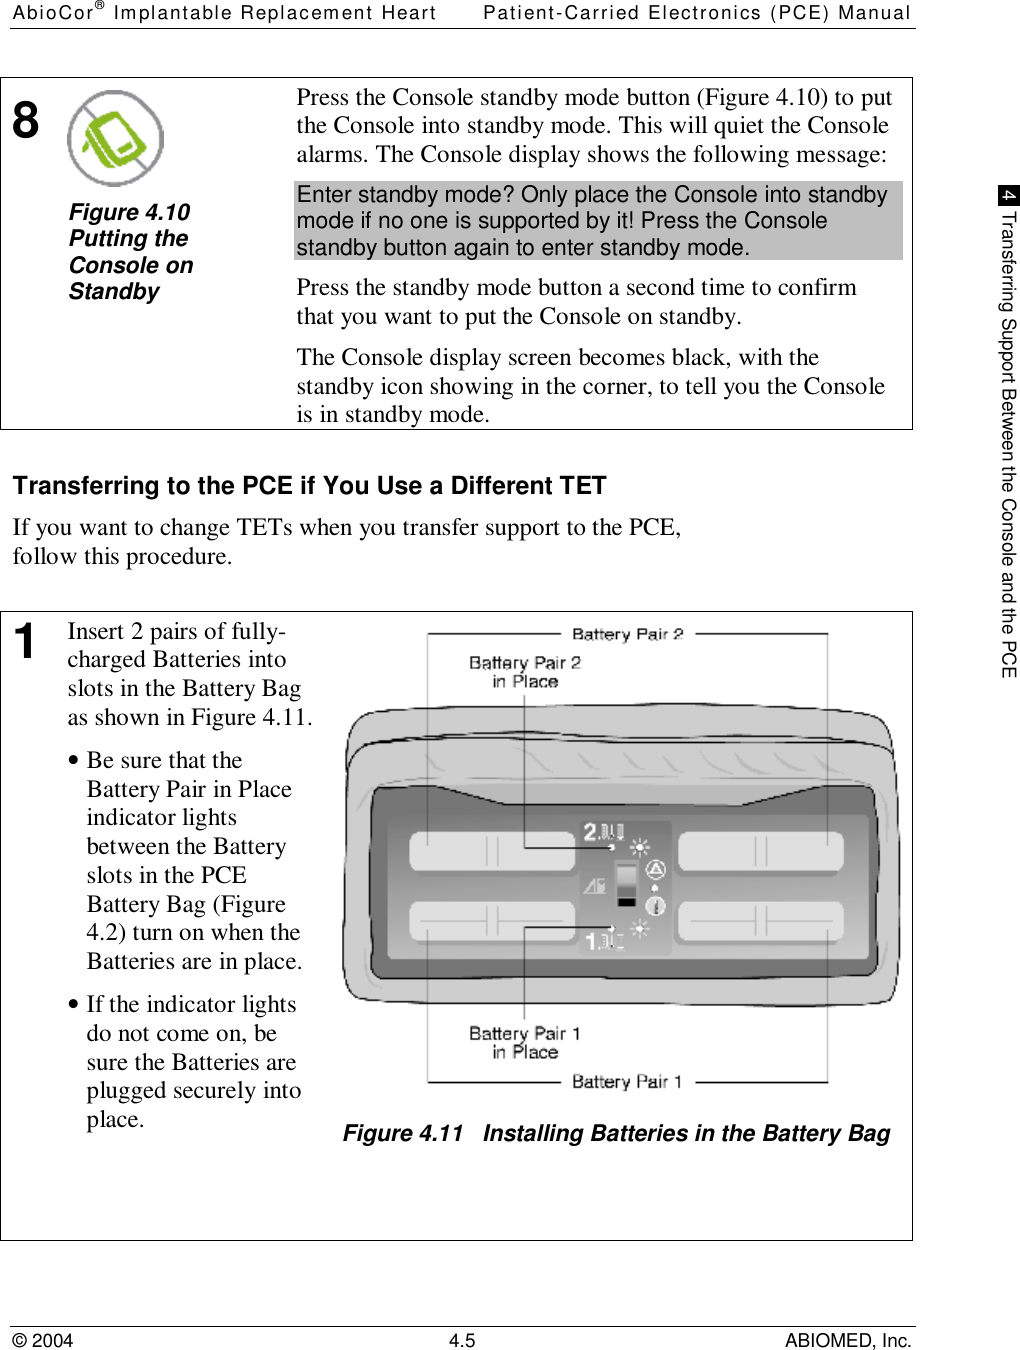 AbioCor® Implantable Replacement Heart Patient-Carried Electronics (PCE) Manual© 2004 4.5 ABIOMED, Inc. 4  Transferring Support Between the Console and the PCE8Figure 4.10Putting theConsole onStandbyPress the Console standby mode button (Figure 4.10) to putthe Console into standby mode. This will quiet the Consolealarms. The Console display shows the following message:Enter standby mode? Only place the Console into standbymode if no one is supported by it! Press the Consolestandby button again to enter standby mode.Press the standby mode button a second time to confirmthat you want to put the Console on standby.The Console display screen becomes black, with thestandby icon showing in the corner, to tell you the Consoleis in standby mode.Transferring to the PCE if You Use a Different TETIf you want to change TETs when you transfer support to the PCE,follow this procedure.1Insert 2 pairs of fully-charged Batteries intoslots in the Battery Bagas shown in Figure 4.11.• Be sure that theBattery Pair in Placeindicator lightsbetween the Batteryslots in the PCEBattery Bag (Figure4.2) turn on when theBatteries are in place.• If the indicator lightsdo not come on, besure the Batteries areplugged securely intoplace. Figure 4.11   Installing Batteries in the Battery Bag